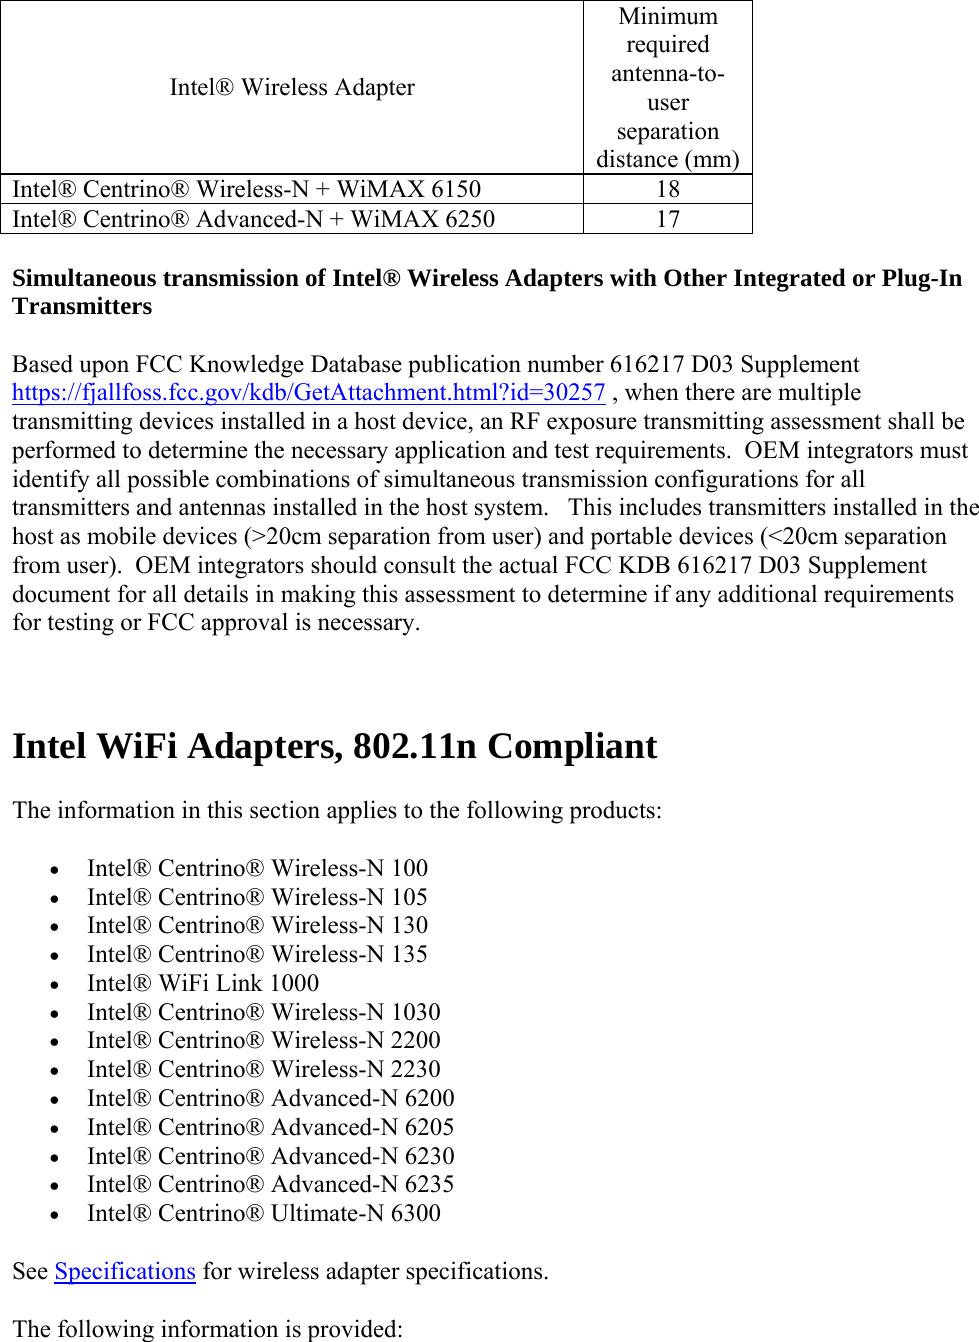 Intel® Wireless Adapter Minimum required antenna-to-user separation distance (mm)Intel® Centrino® Wireless-N + WiMAX 6150  18 Intel® Centrino® Advanced-N + WiMAX 6250  17  Simultaneous transmission of Intel® Wireless Adapters with Other Integrated or Plug-In Transmitters  Based upon FCC Knowledge Database publication number 616217 D03 Supplement https://fjallfoss.fcc.gov/kdb/GetAttachment.html?id=30257 , when there are multiple transmitting devices installed in a host device, an RF exposure transmitting assessment shall be performed to determine the necessary application and test requirements.  OEM integrators must identify all possible combinations of simultaneous transmission configurations for all transmitters and antennas installed in the host system.   This includes transmitters installed in the host as mobile devices (&gt;20cm separation from user) and portable devices (&lt;20cm separation from user).  OEM integrators should consult the actual FCC KDB 616217 D03 Supplement document for all details in making this assessment to determine if any additional requirements for testing or FCC approval is necessary.   Intel WiFi Adapters, 802.11n Compliant The information in this section applies to the following products:  Intel® Centrino® Wireless-N 100   Intel® Centrino® Wireless-N 105  Intel® Centrino® Wireless-N 130  Intel® Centrino® Wireless-N 135  Intel® WiFi Link 1000  Intel® Centrino® Wireless-N 1030   Intel® Centrino® Wireless-N 2200   Intel® Centrino® Wireless-N 2230  Intel® Centrino® Advanced-N 6200  Intel® Centrino® Advanced-N 6205  Intel® Centrino® Advanced-N 6230  Intel® Centrino® Advanced-N 6235  Intel® Centrino® Ultimate-N 6300 See Specifications for wireless adapter specifications.  The following information is provided:  